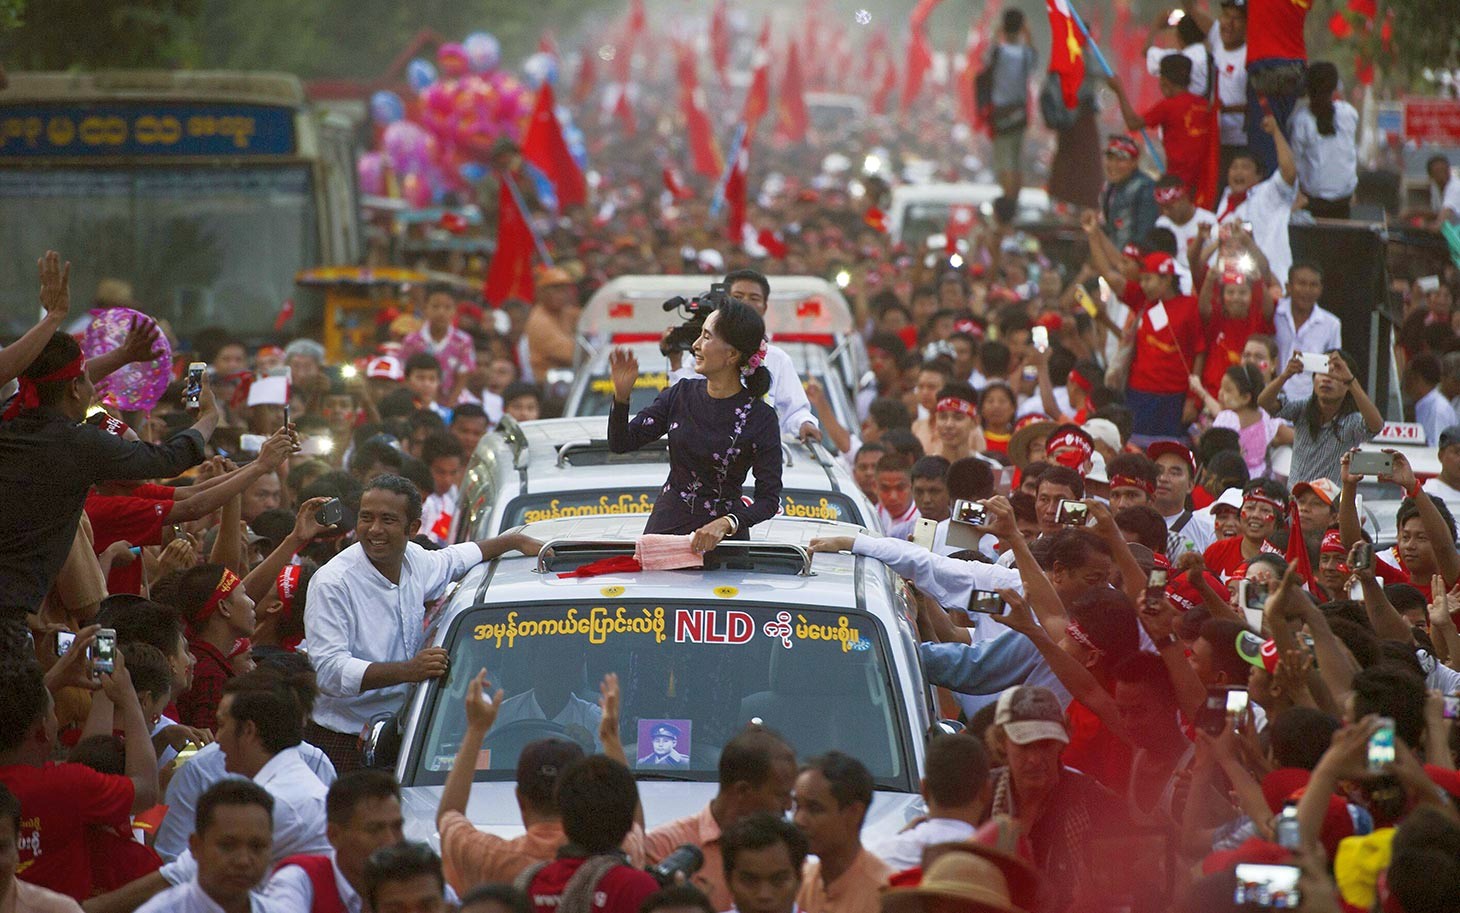 Aung San Suu Kyi, leader of the National League for Democracy (photo credit: PoliticoScope)